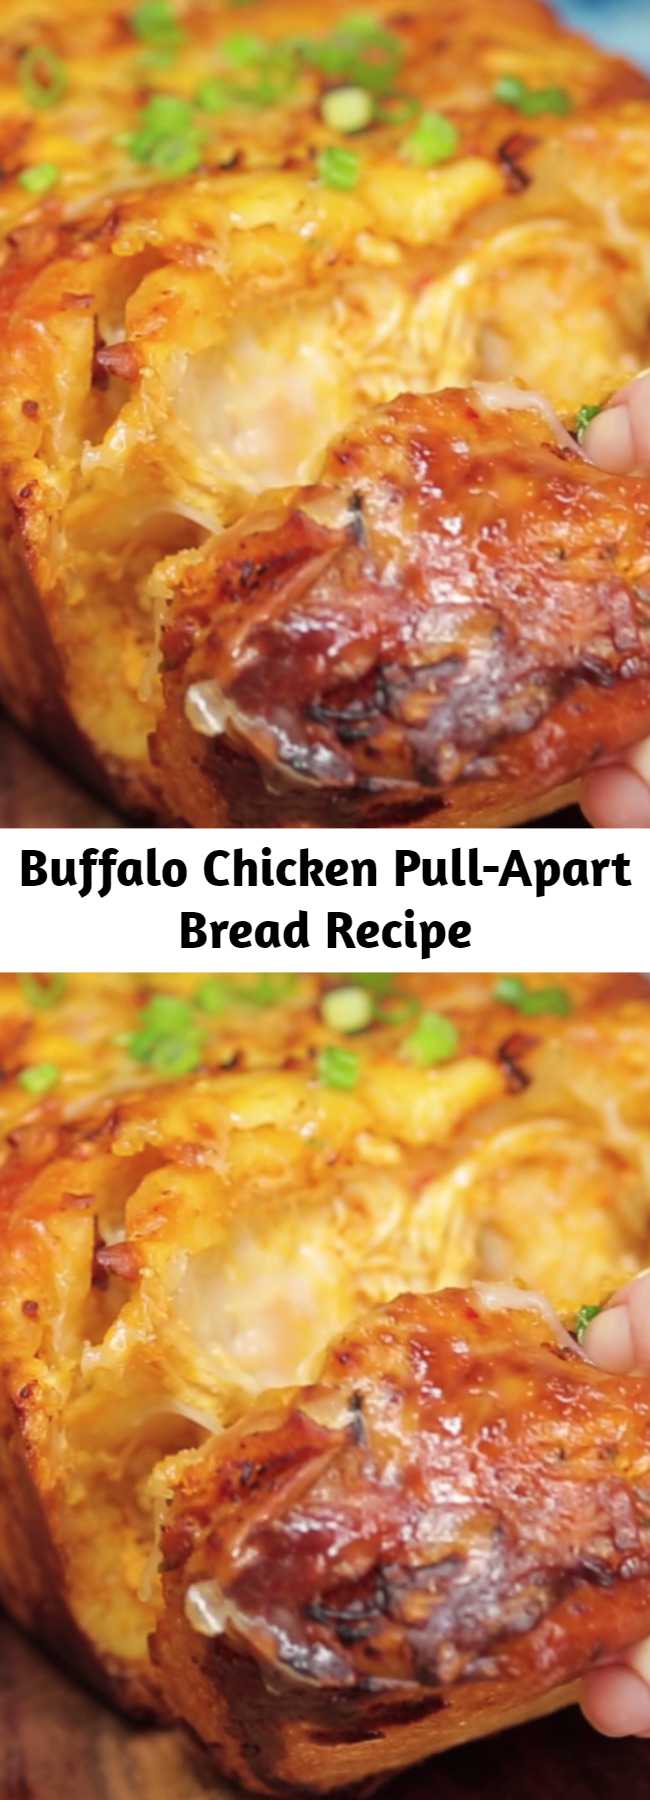 Buffalo Chicken Pull-Apart Bread Recipe - The only way to improve shareable bread is with Buffalo chicken and lots of cheese.